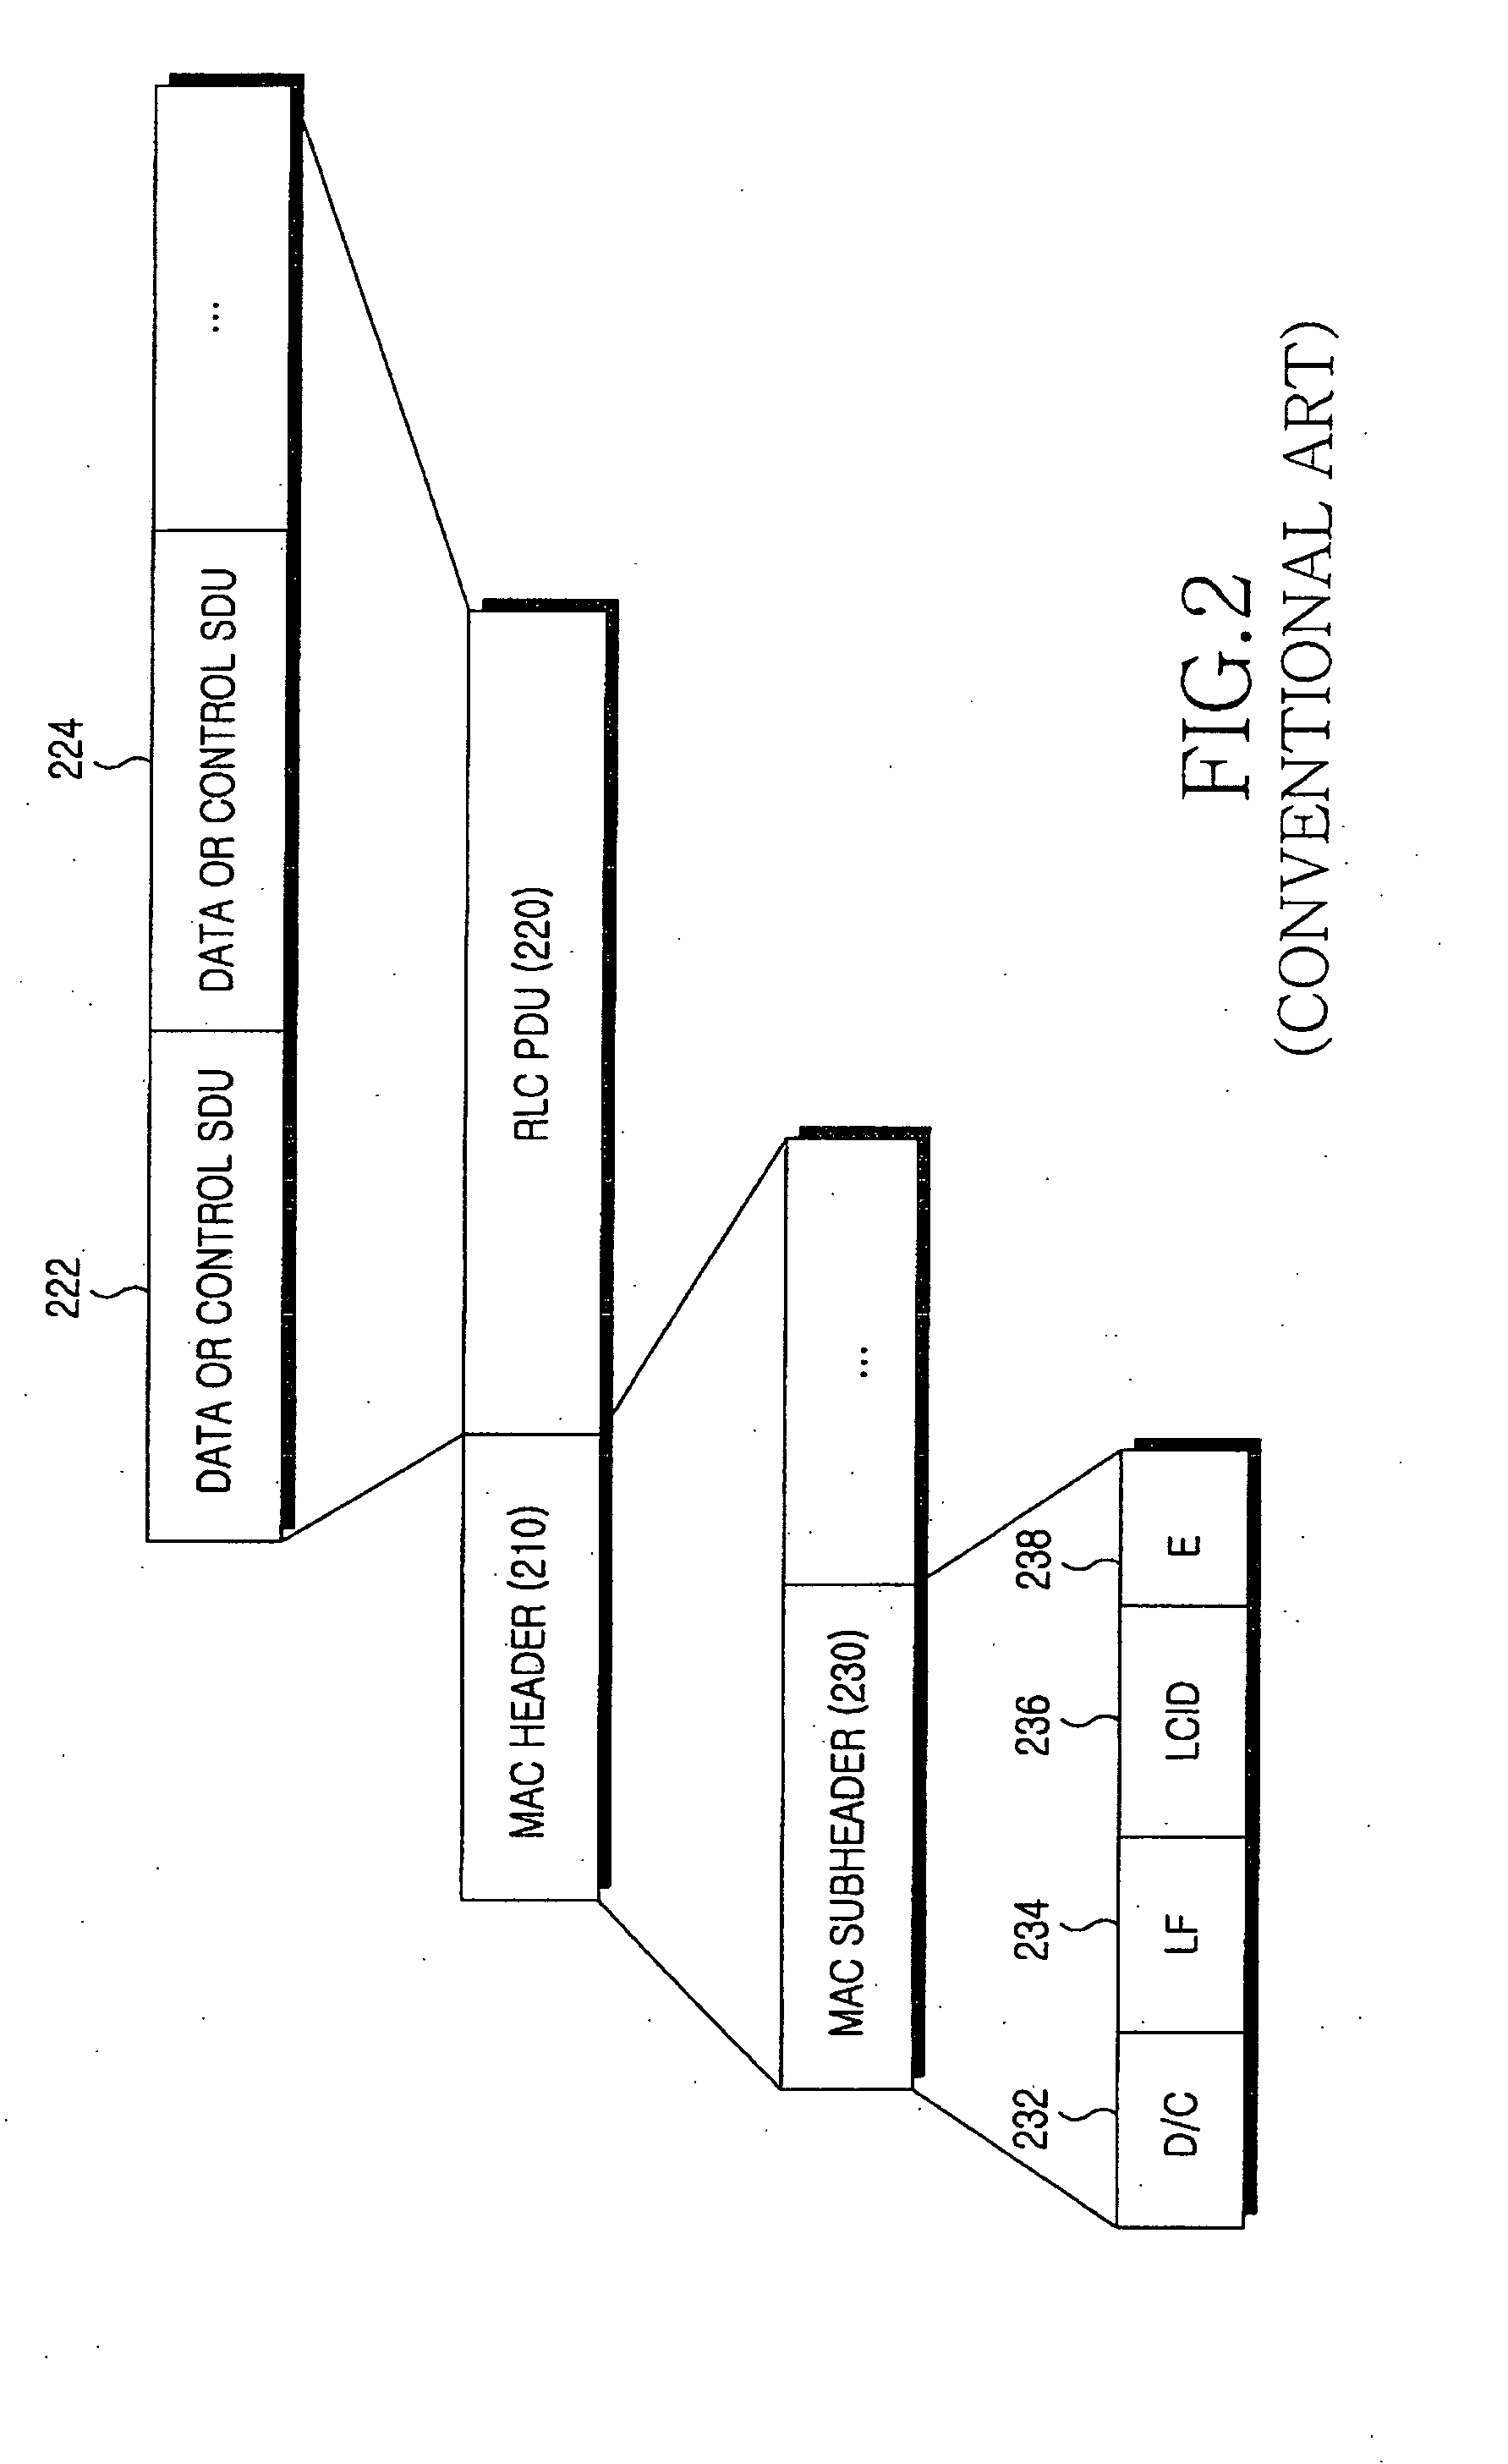 Apparatus and method for generating MAC PDU in mobile communication system